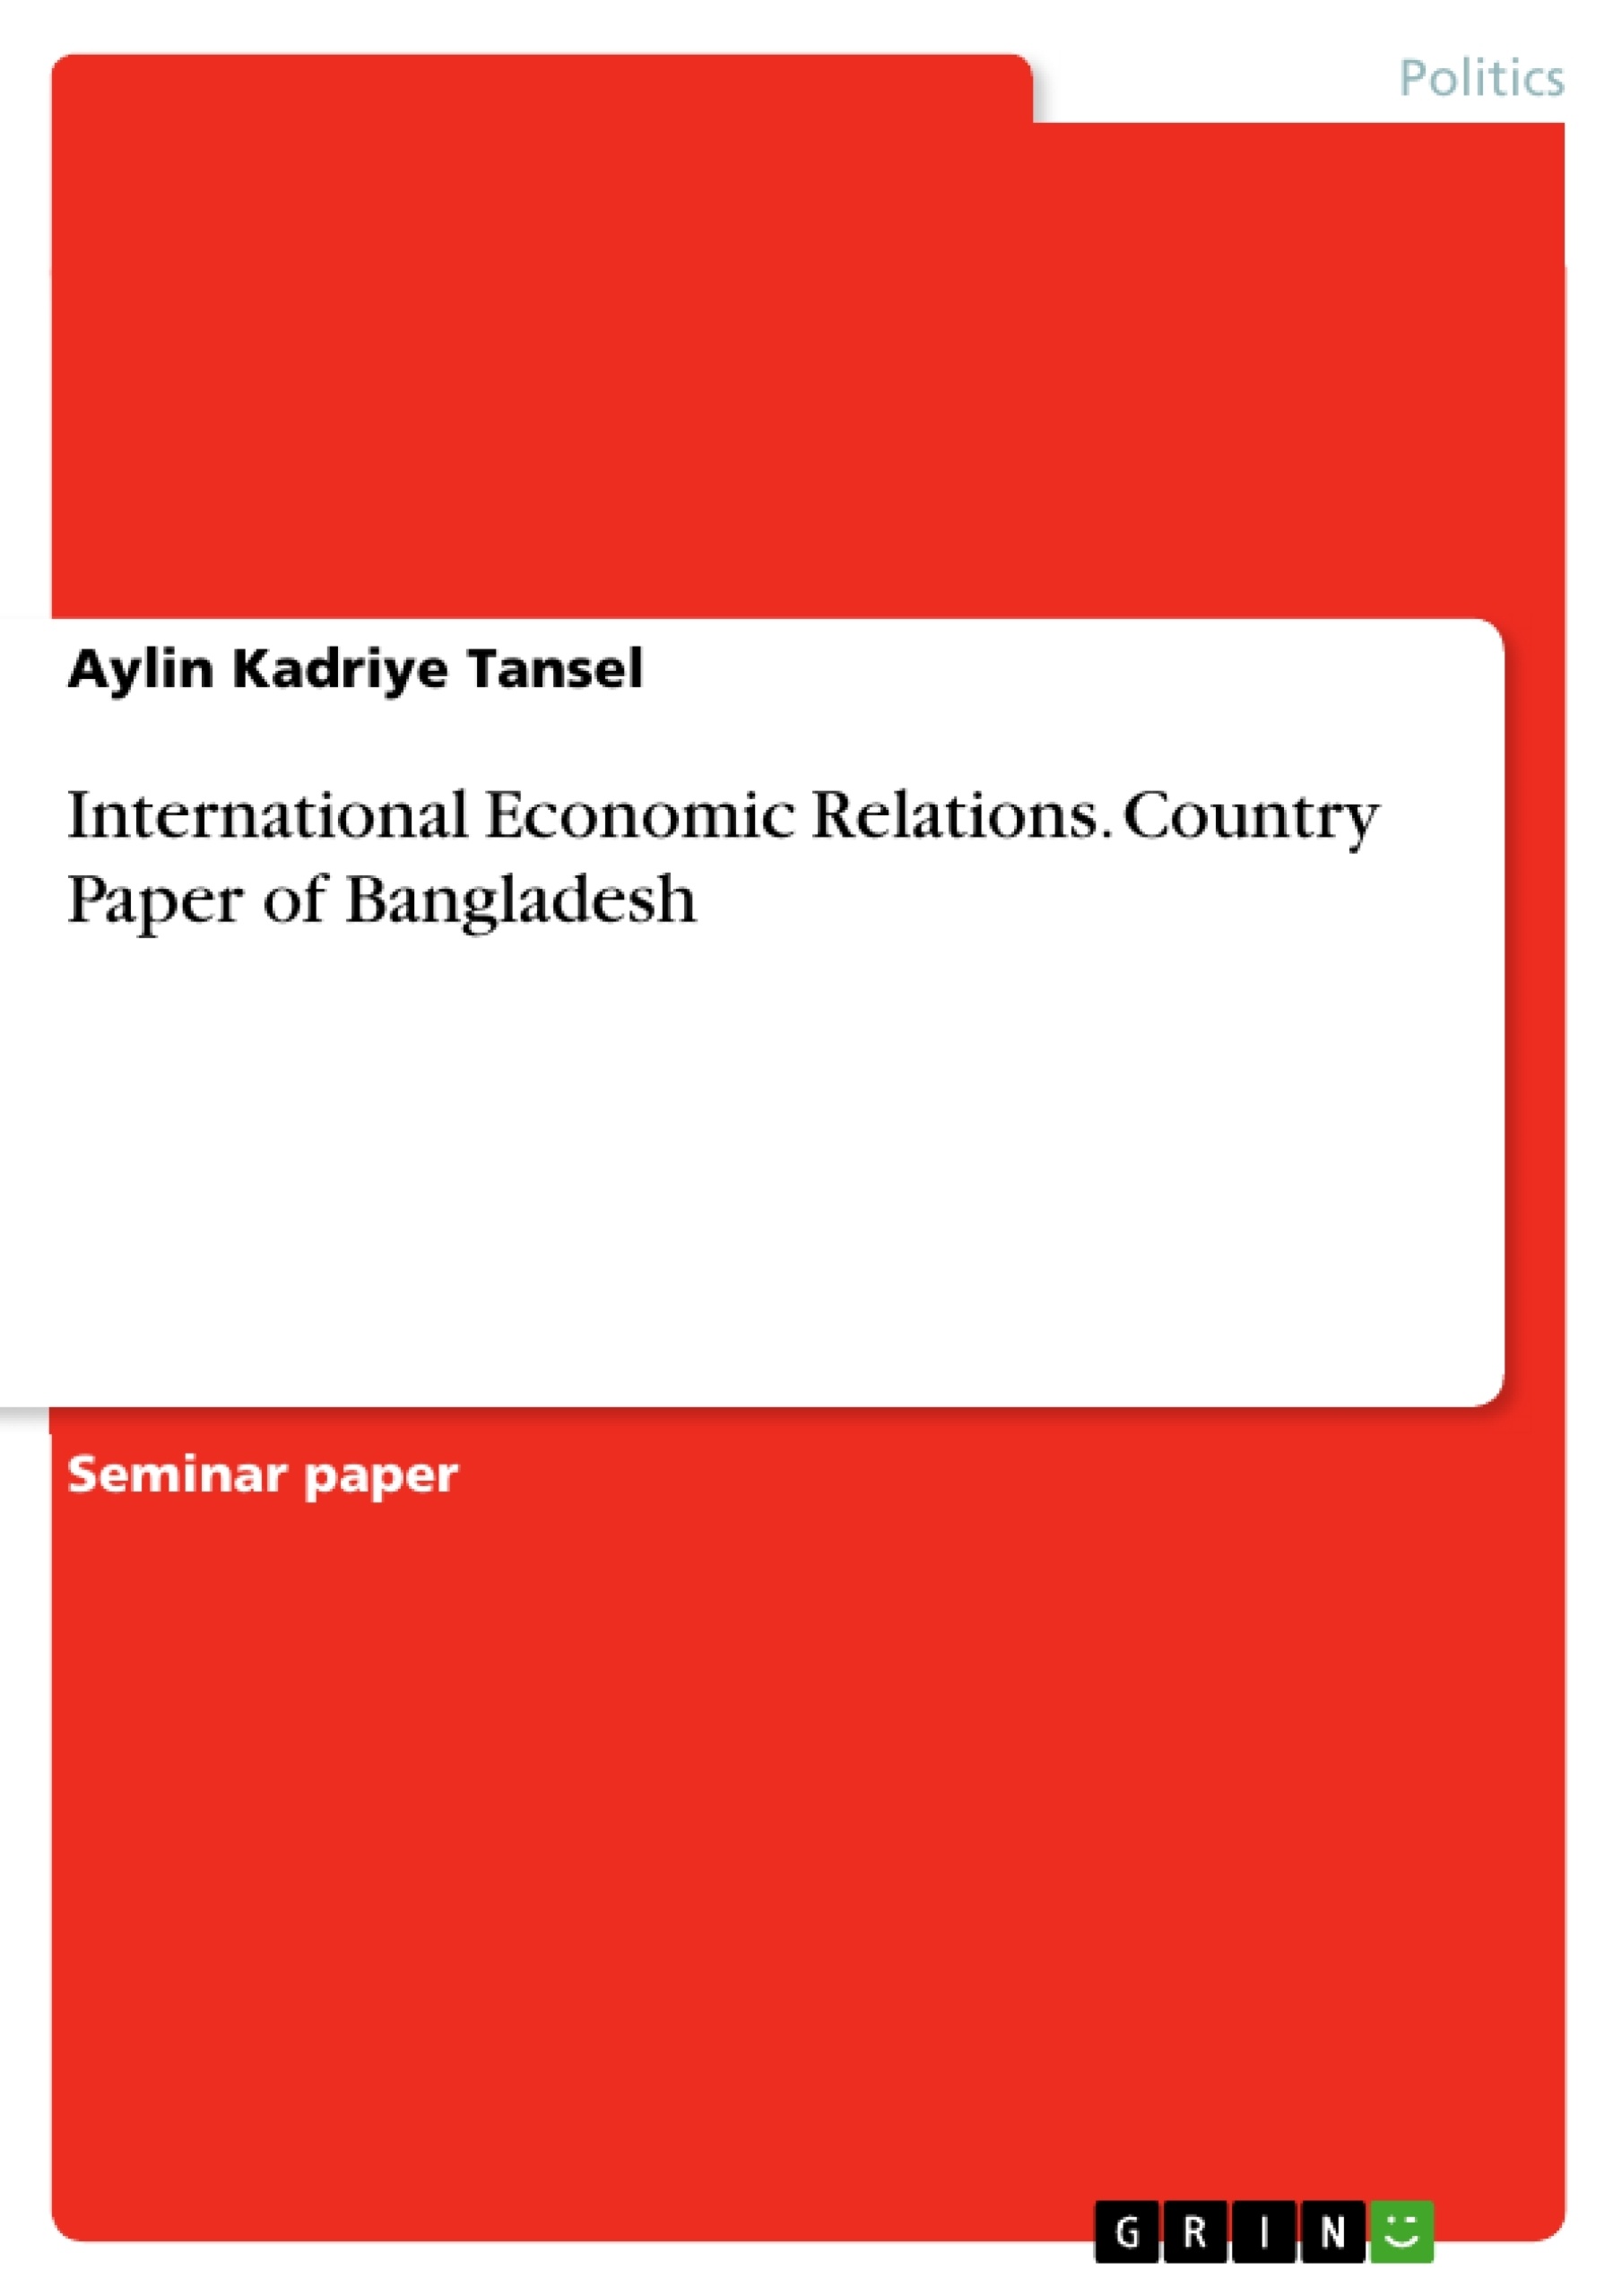 Title: International Economic Relations. Country Paper of Bangladesh